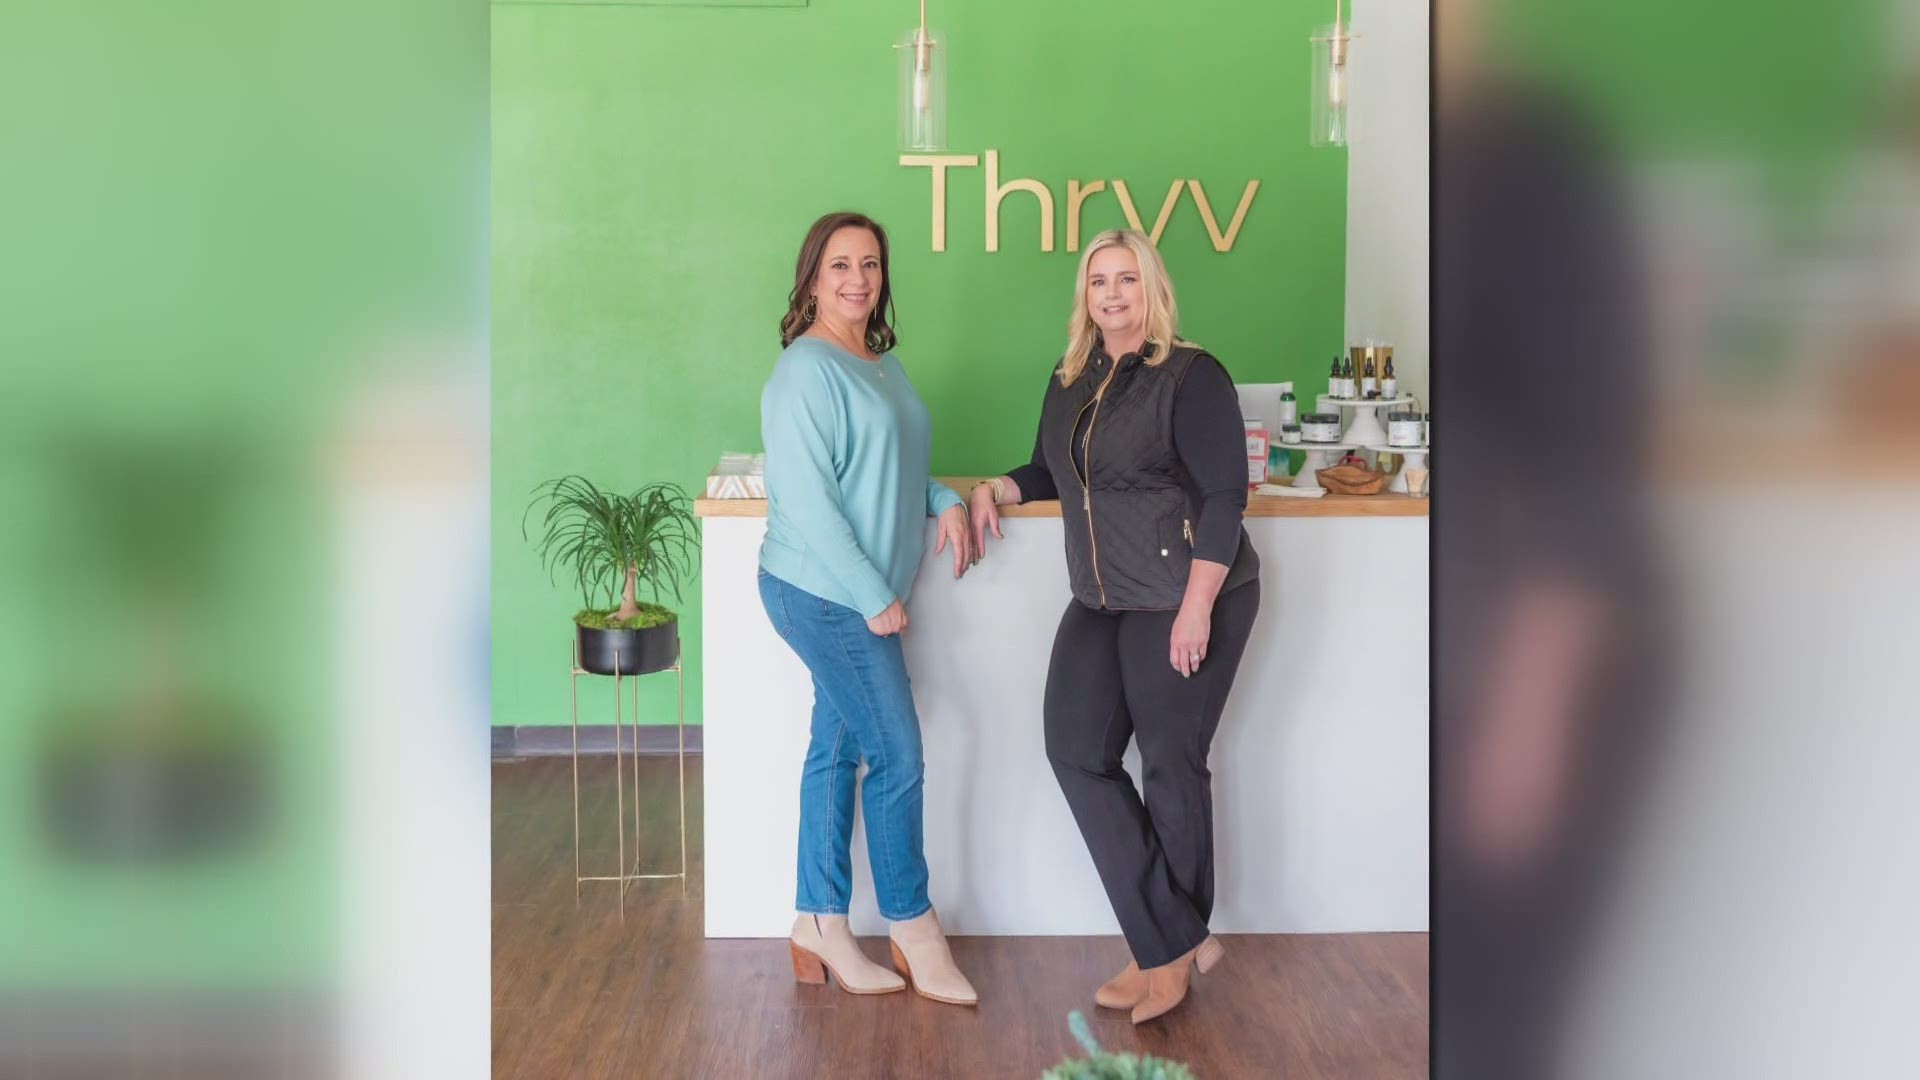 Thryv Organics, a premium CBD shop, is often where people turn when they've exhausted other options, the co-owners say.